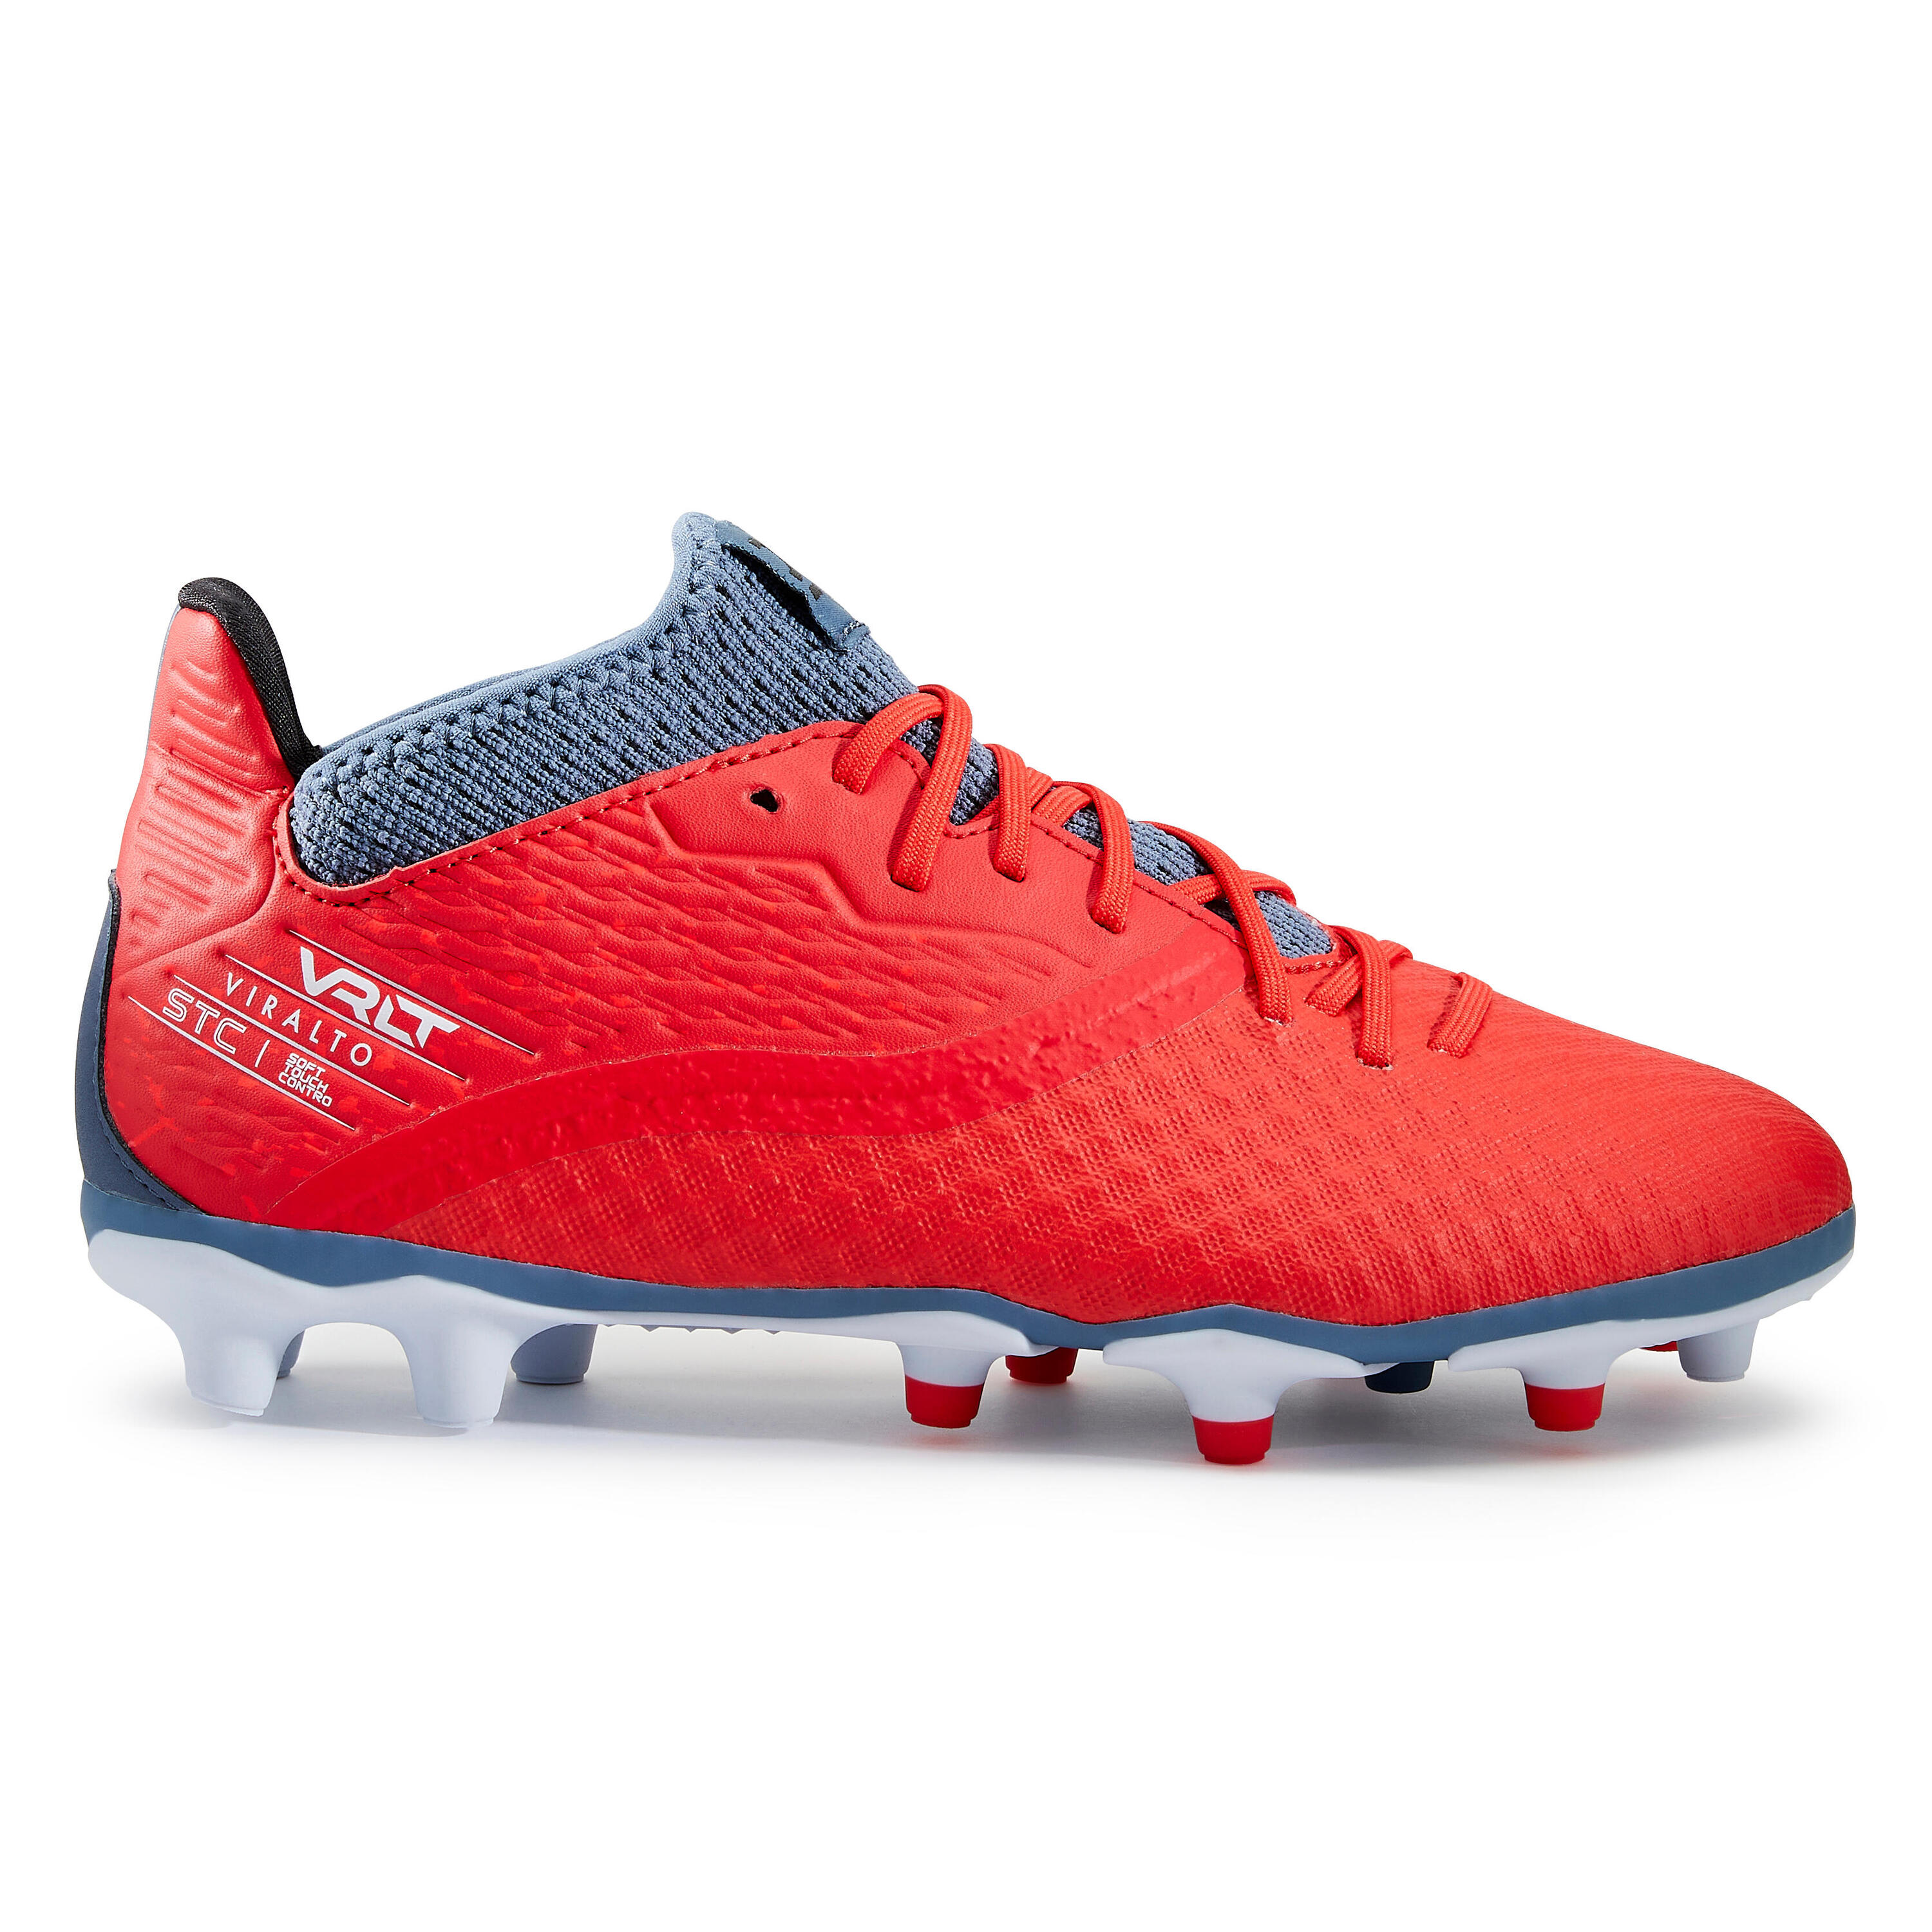 Kids' Lace-Up Football Boots Viralto III FG - Red/Grey 2/11